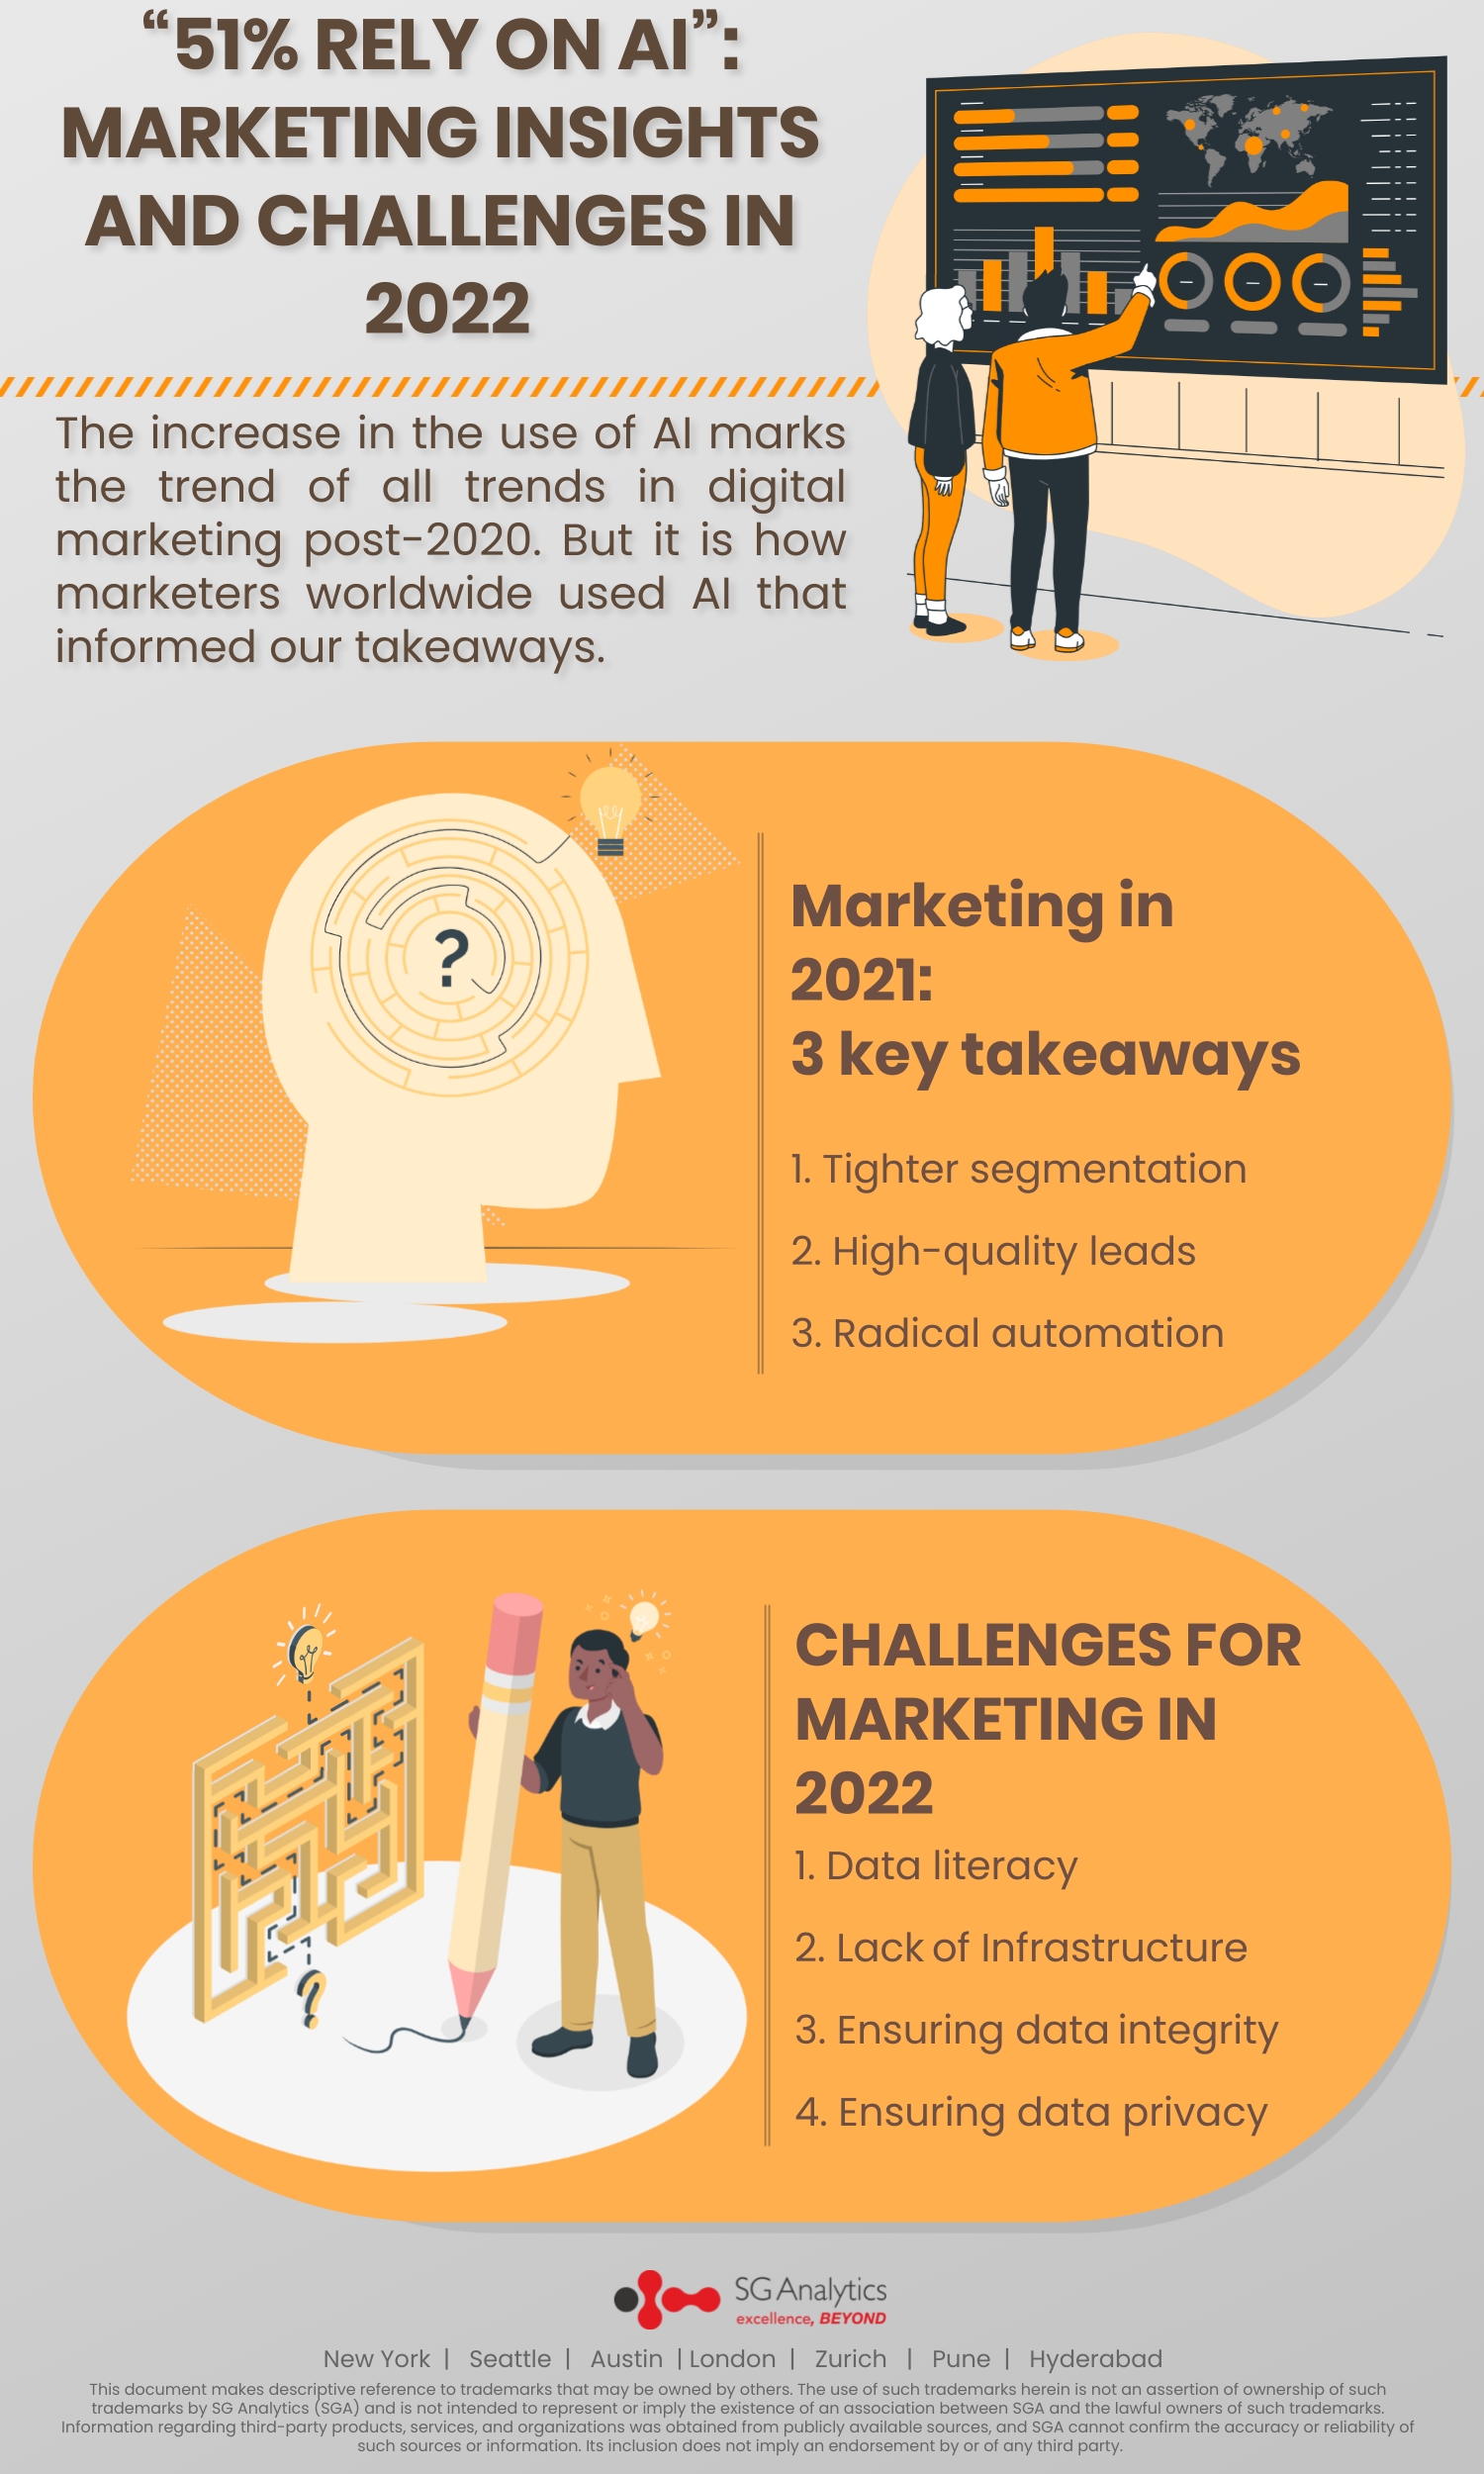 51 Rely on Marketing Insights and Challenges in 2022